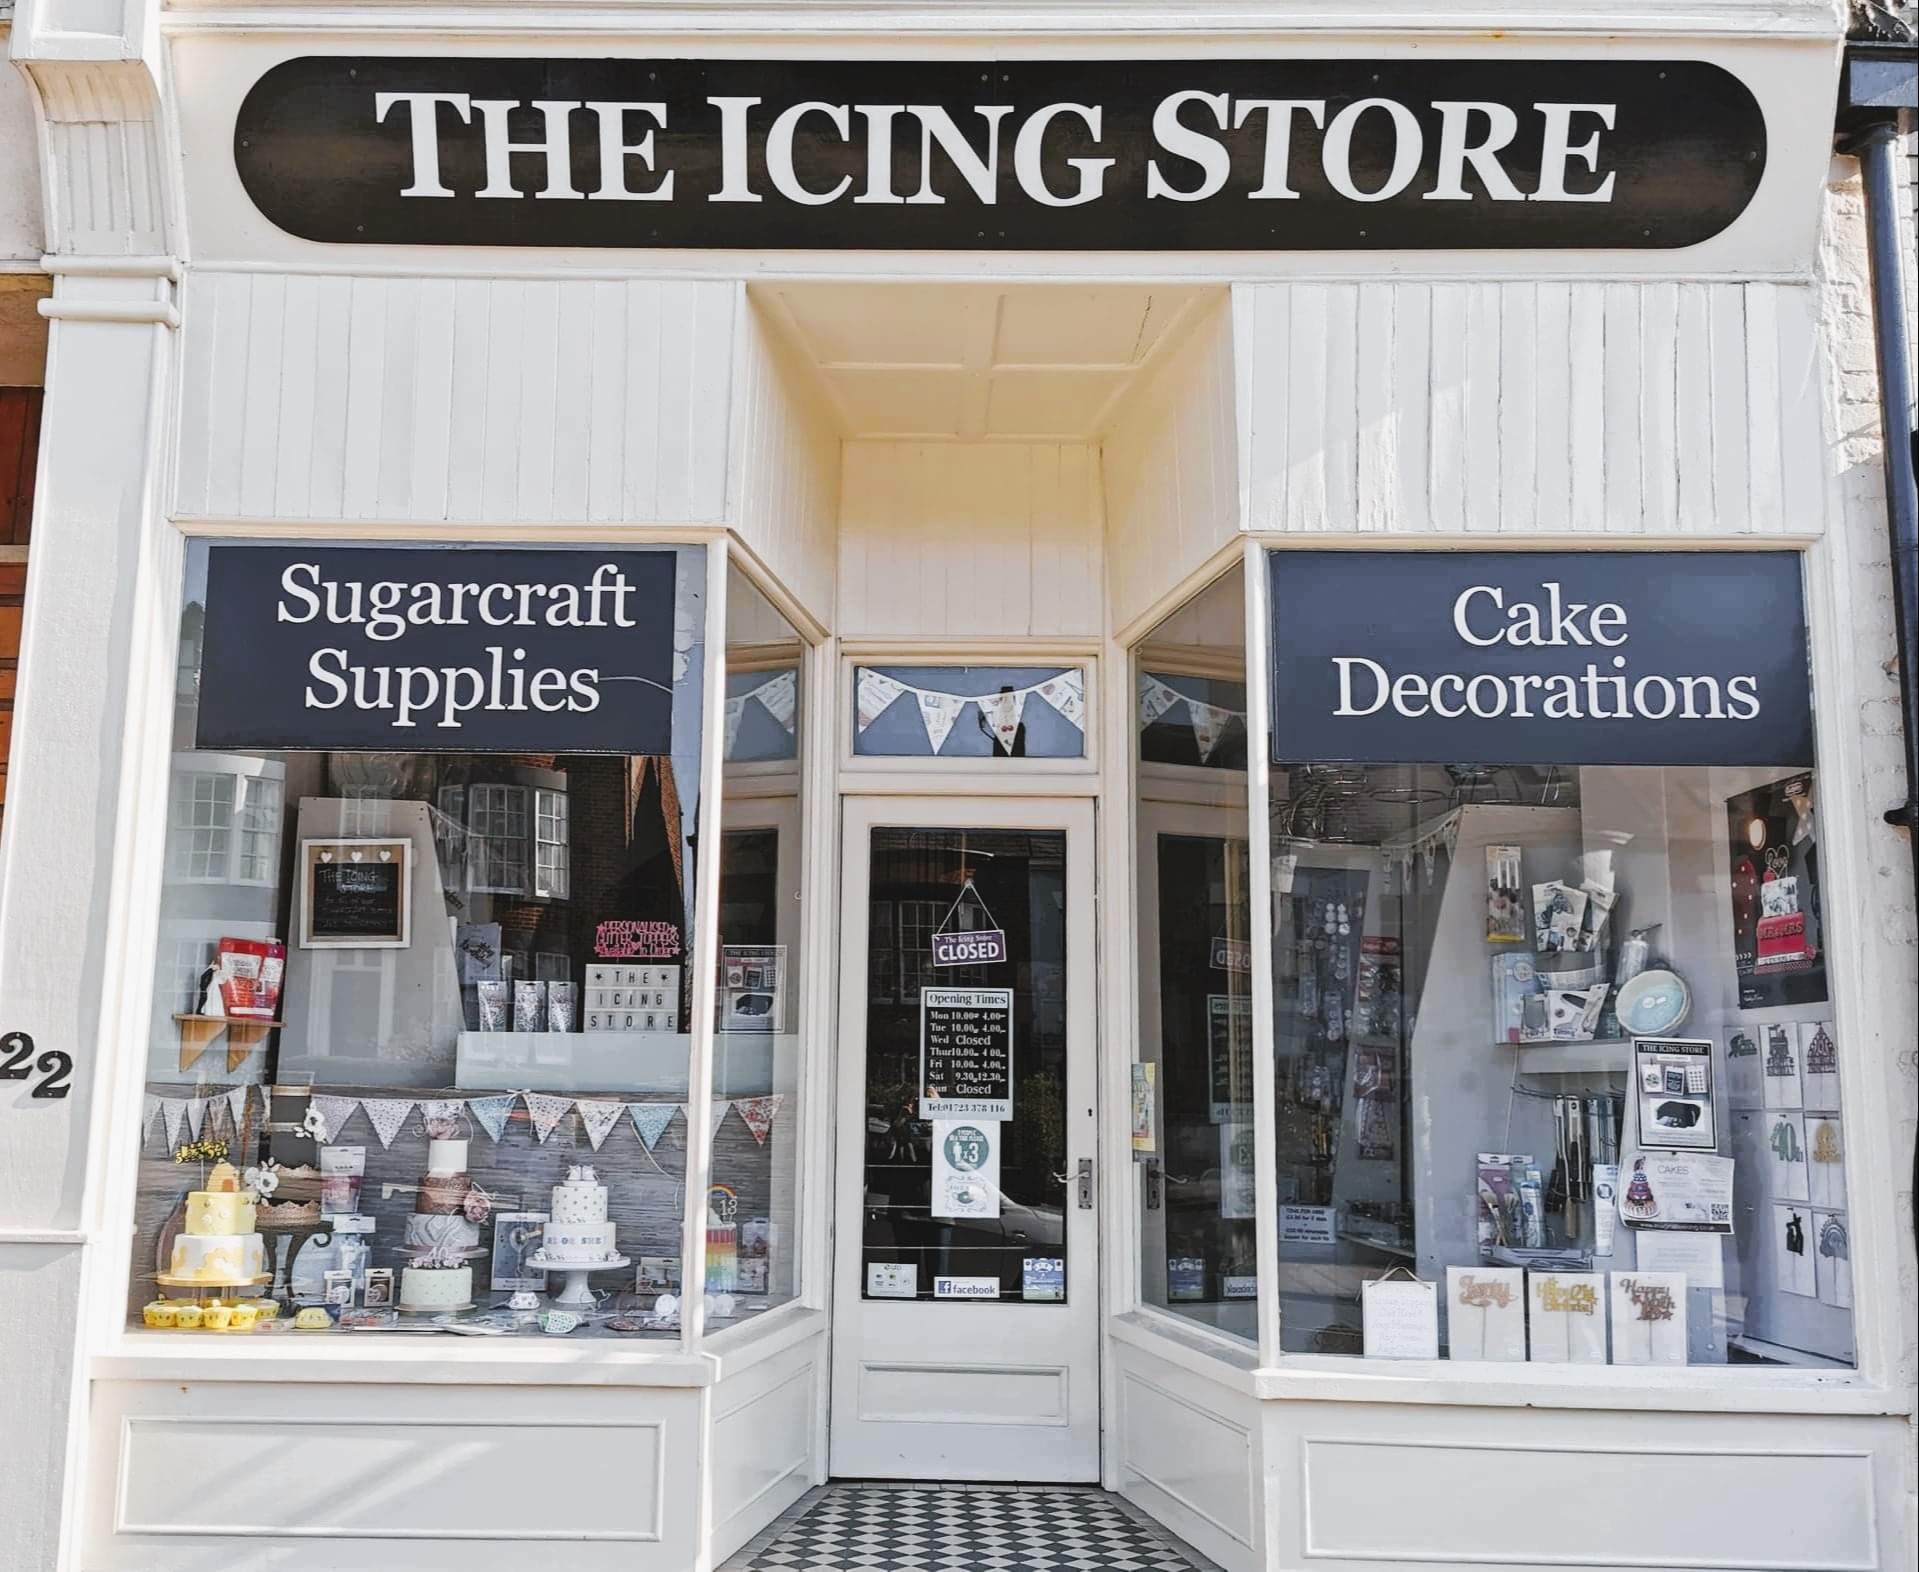 THE ICING STORE SHOP FRONT